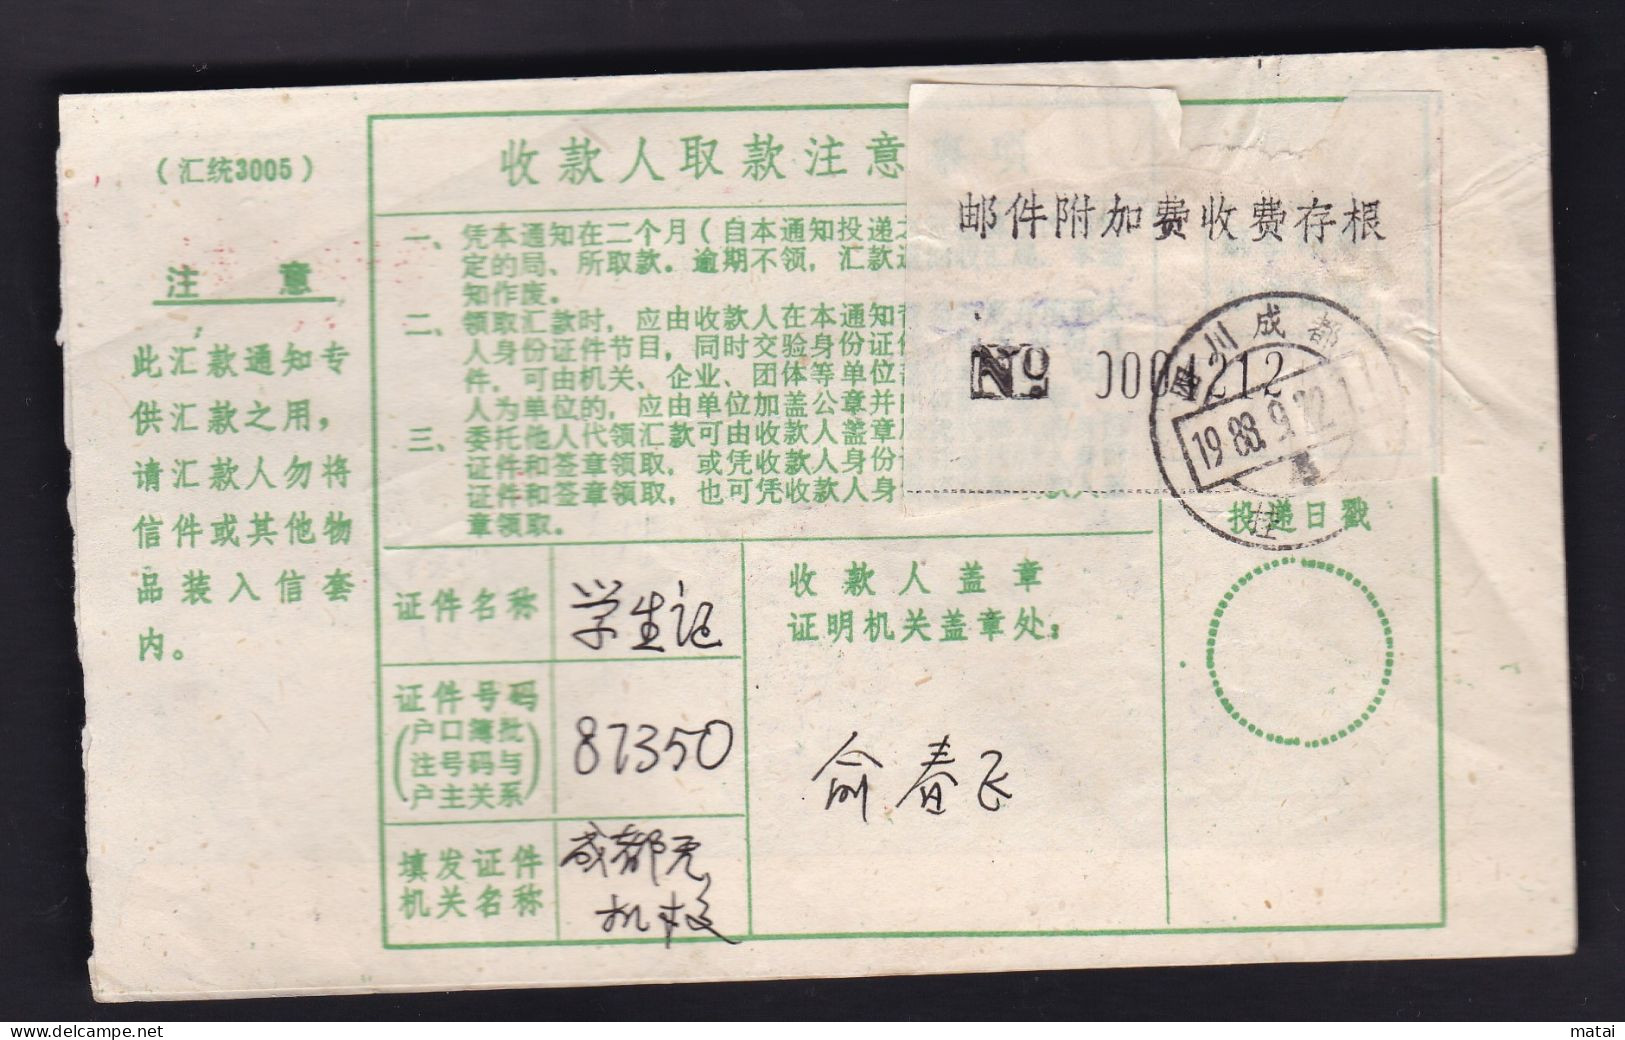 CHINA CHINE CINA Remittance Note WITH ZHEJIANG HAINING 314400 ADDED CHARGE LABEL (ACL) - Covers & Documents